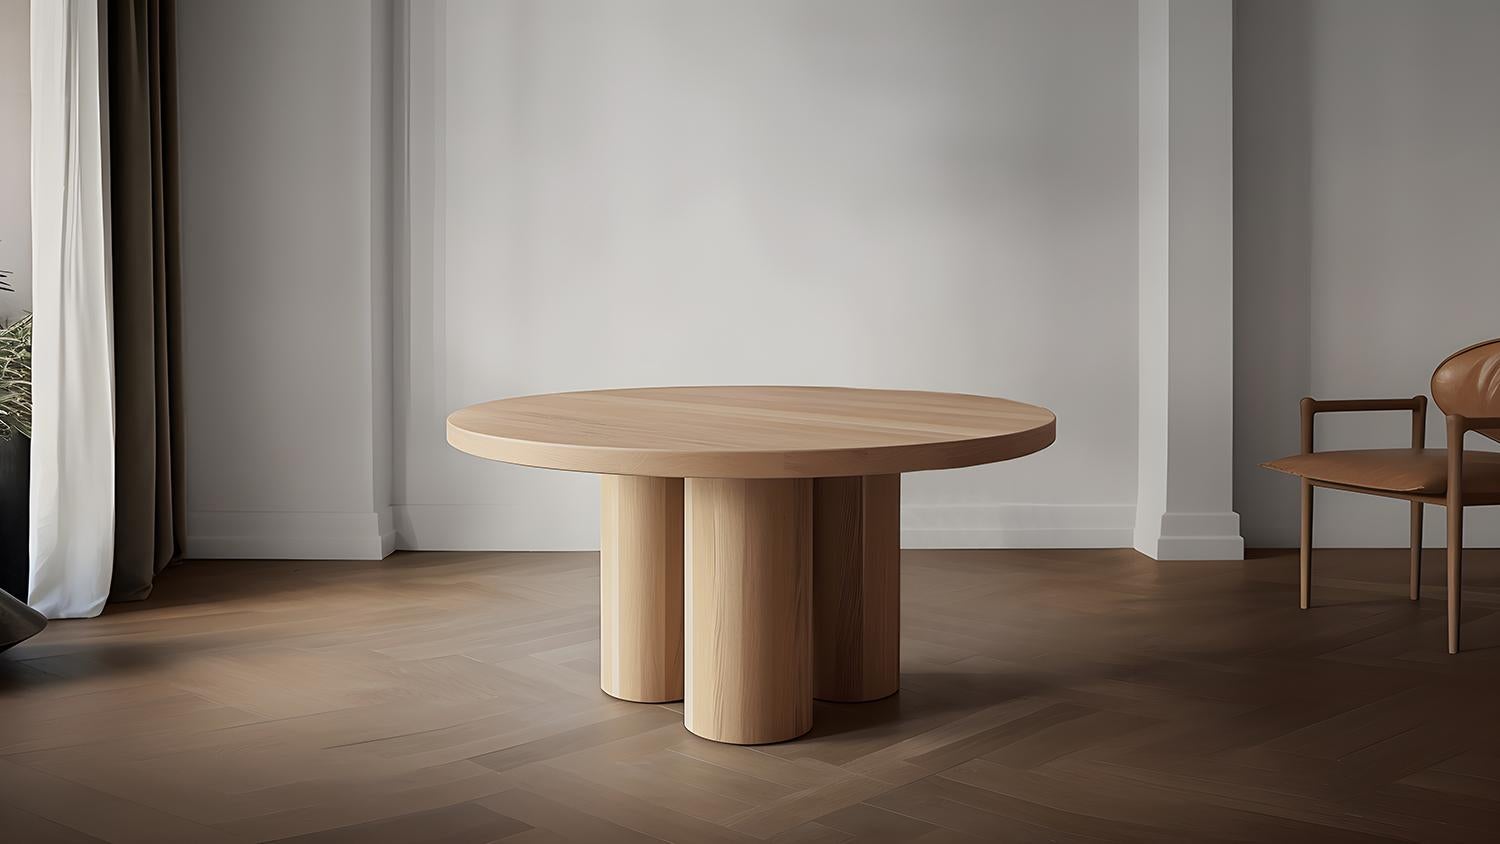 Podio Circular Round Dining Table

The NONO design team presents a dining table that exudes elegance and modernity. The foundation of this piece is a cluster of cylindrical columns, providing a sturdy base for the beautiful circular top. Its